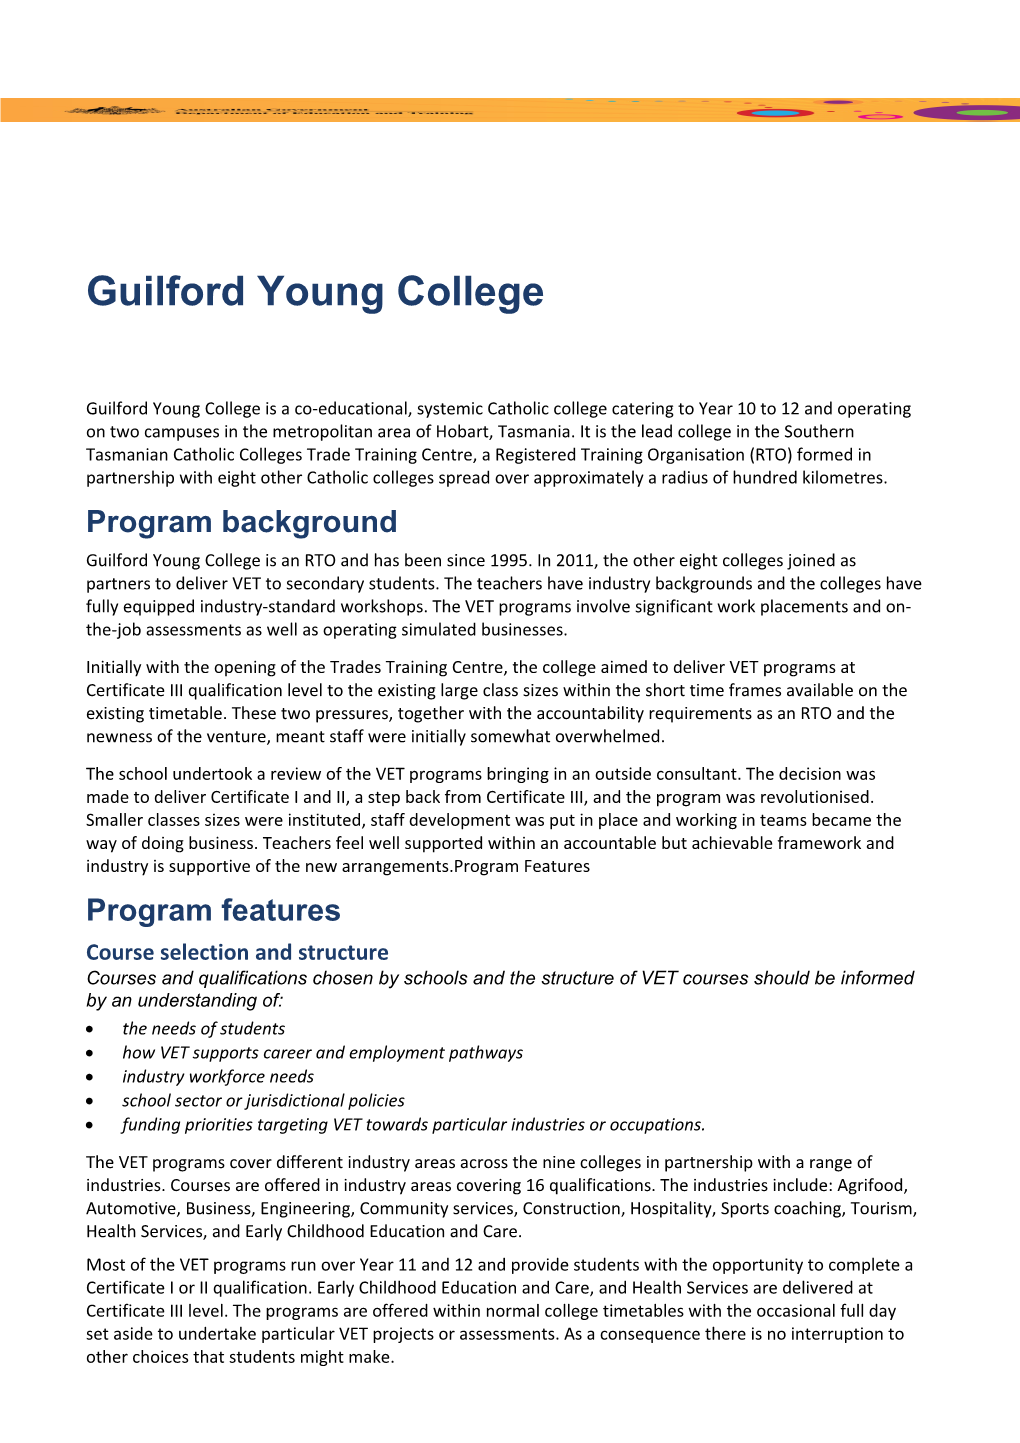 Guilford Young College